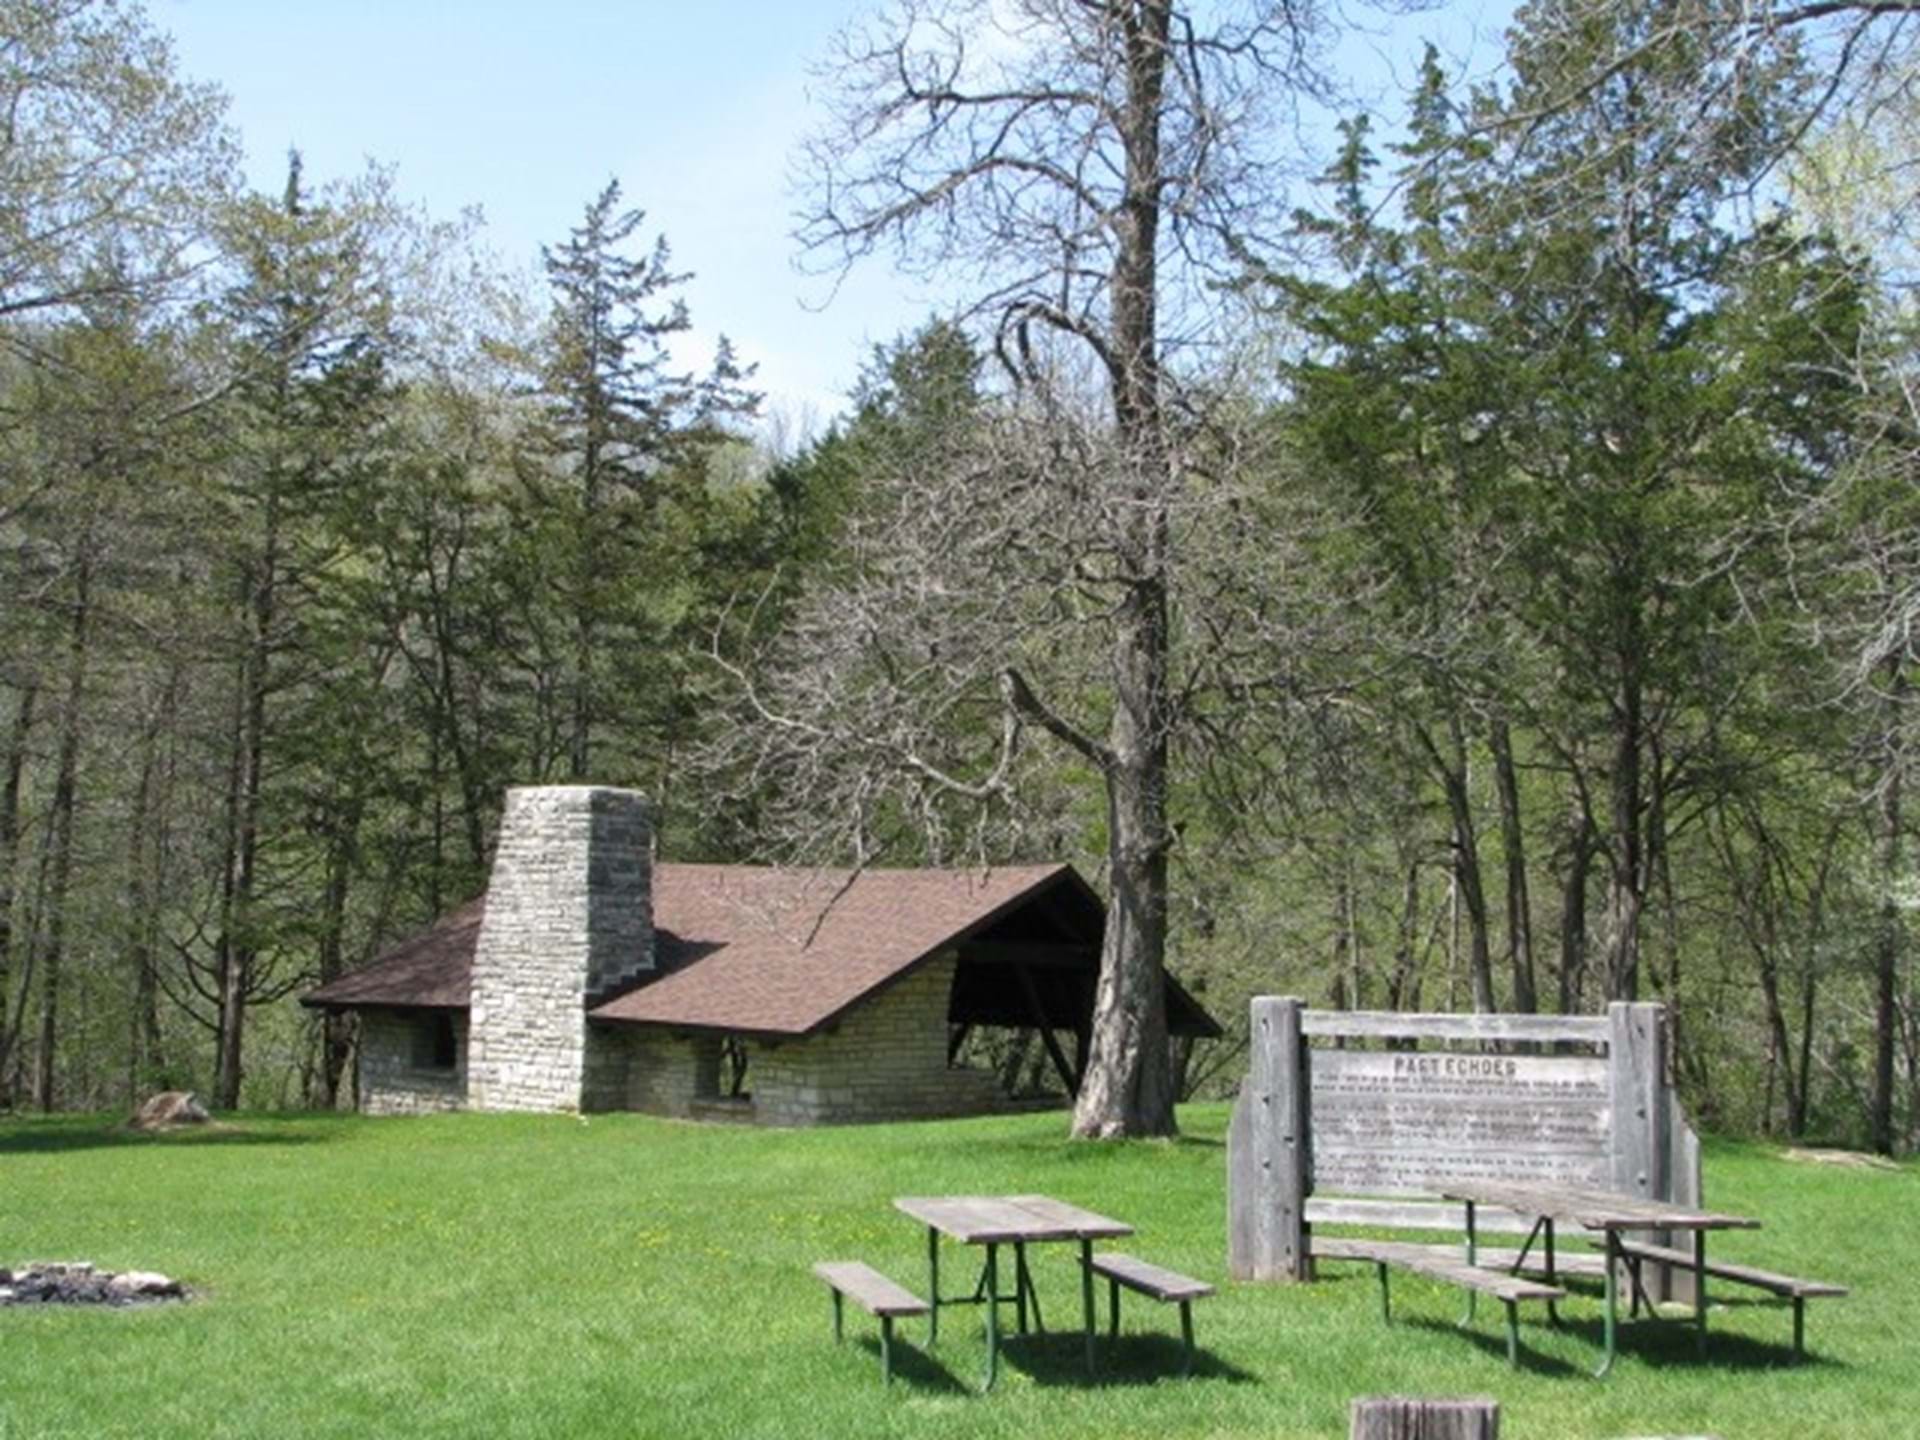 CCC Shelter House in Echo Valley State Park